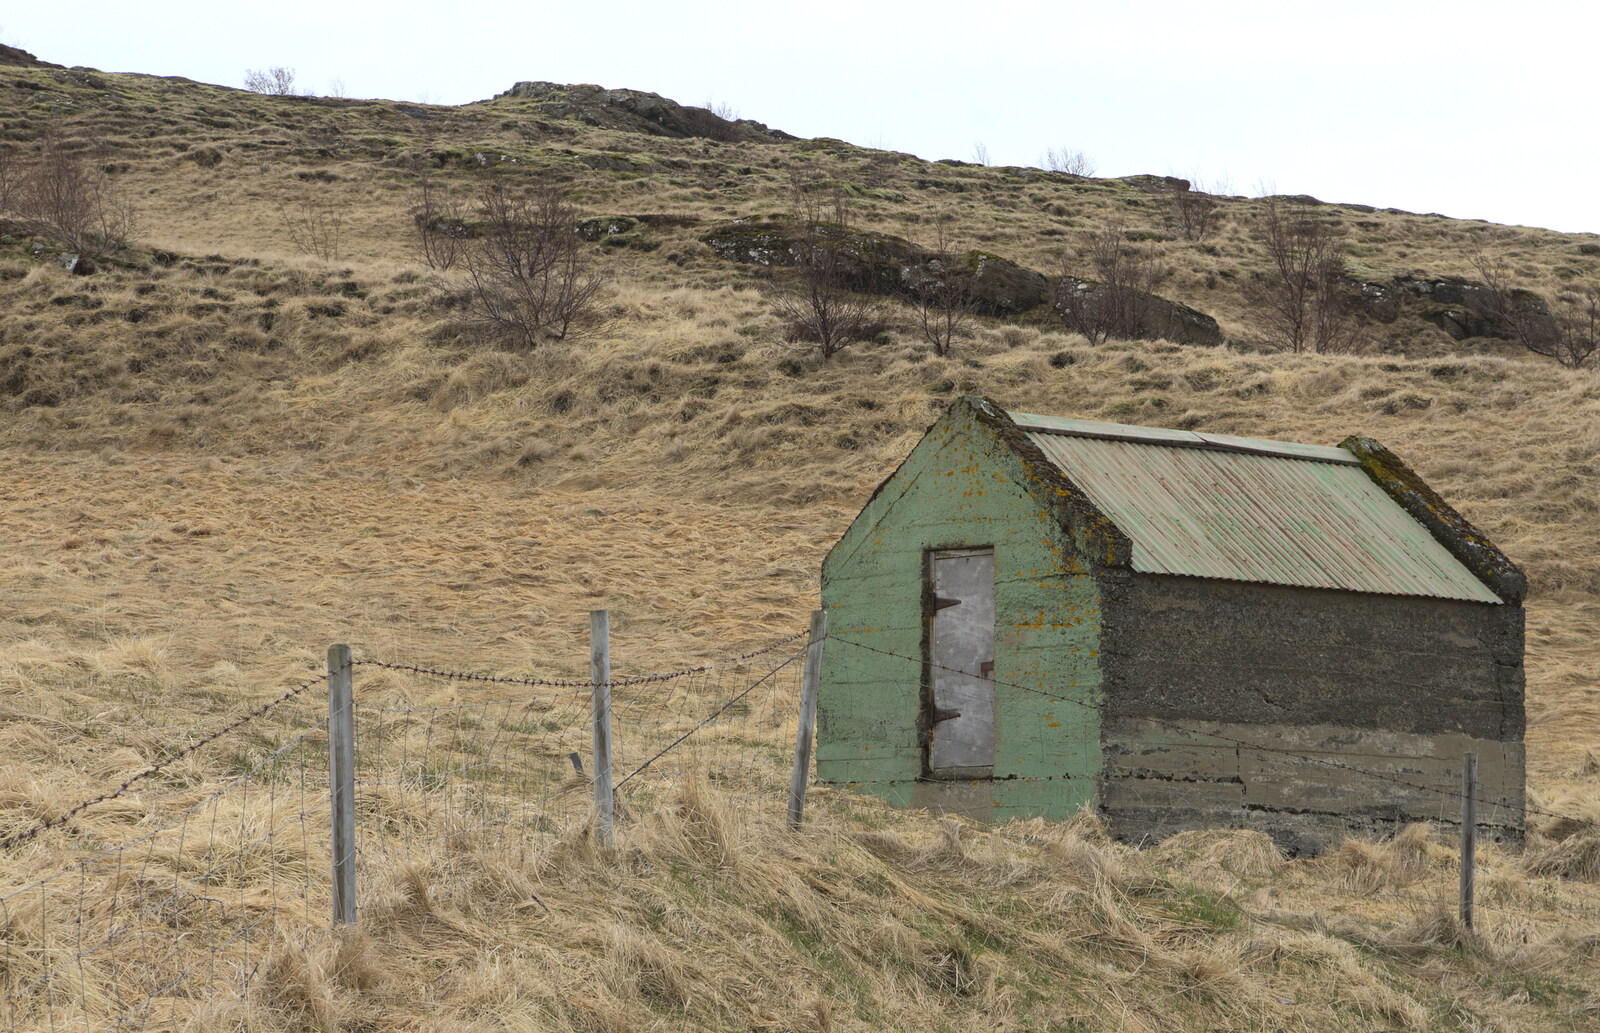 Another view of the derelict hut from The Golden Circle of Ísland, Iceland - 22nd April 2017